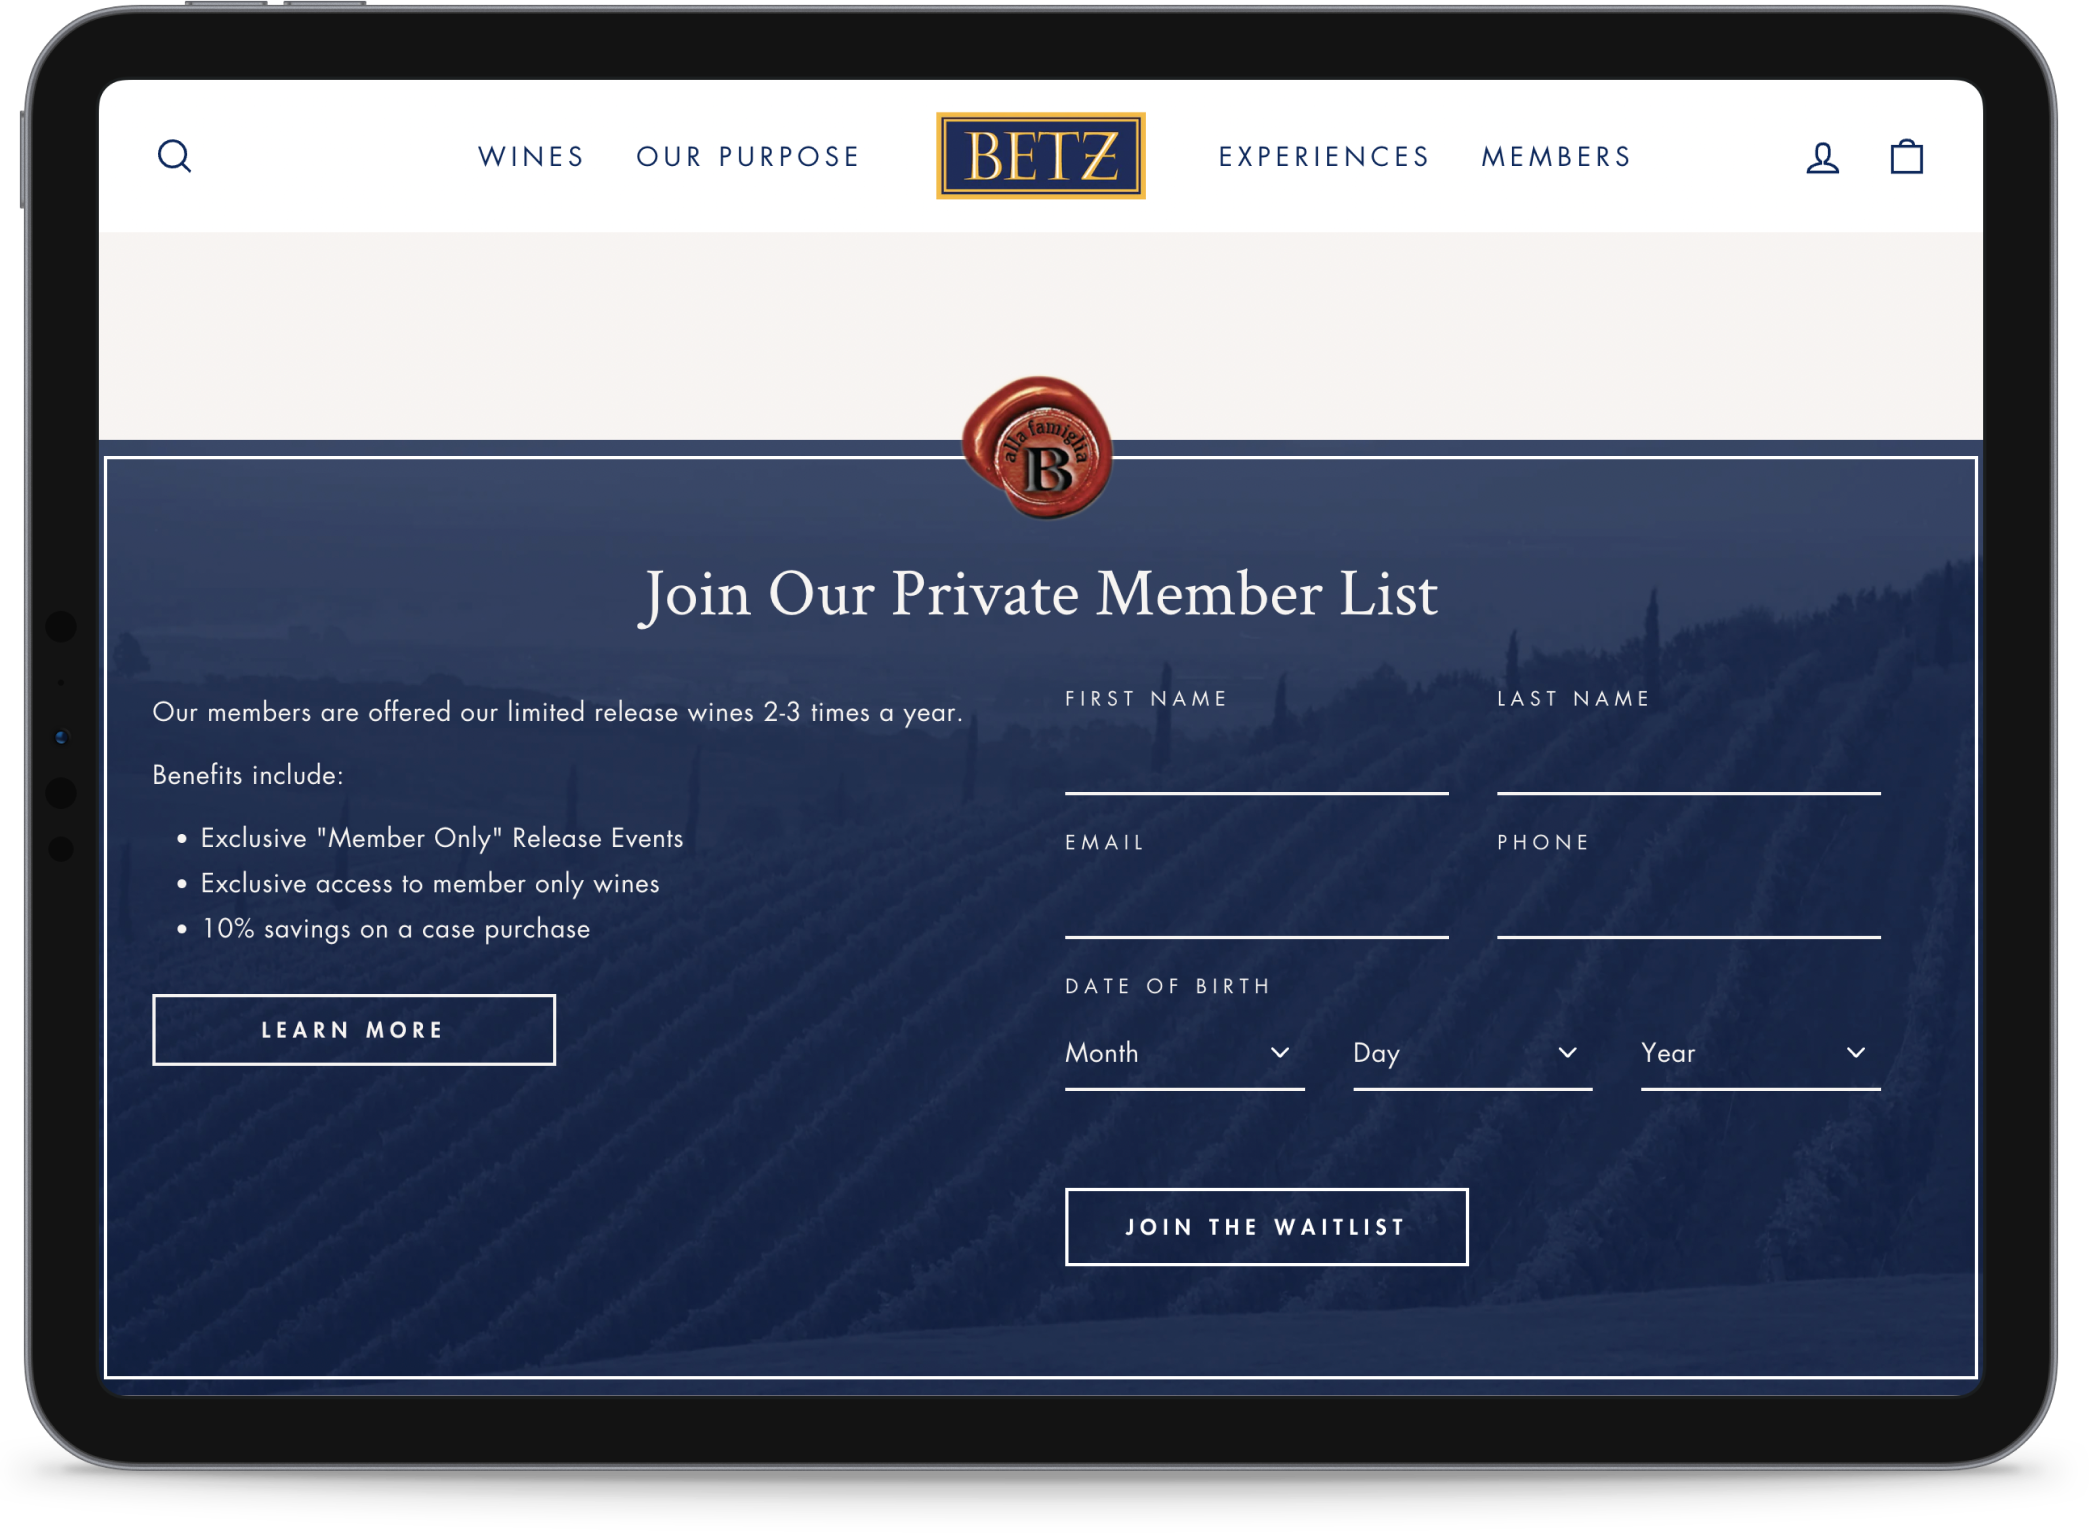 Betz wine club join form displayed in tablet device